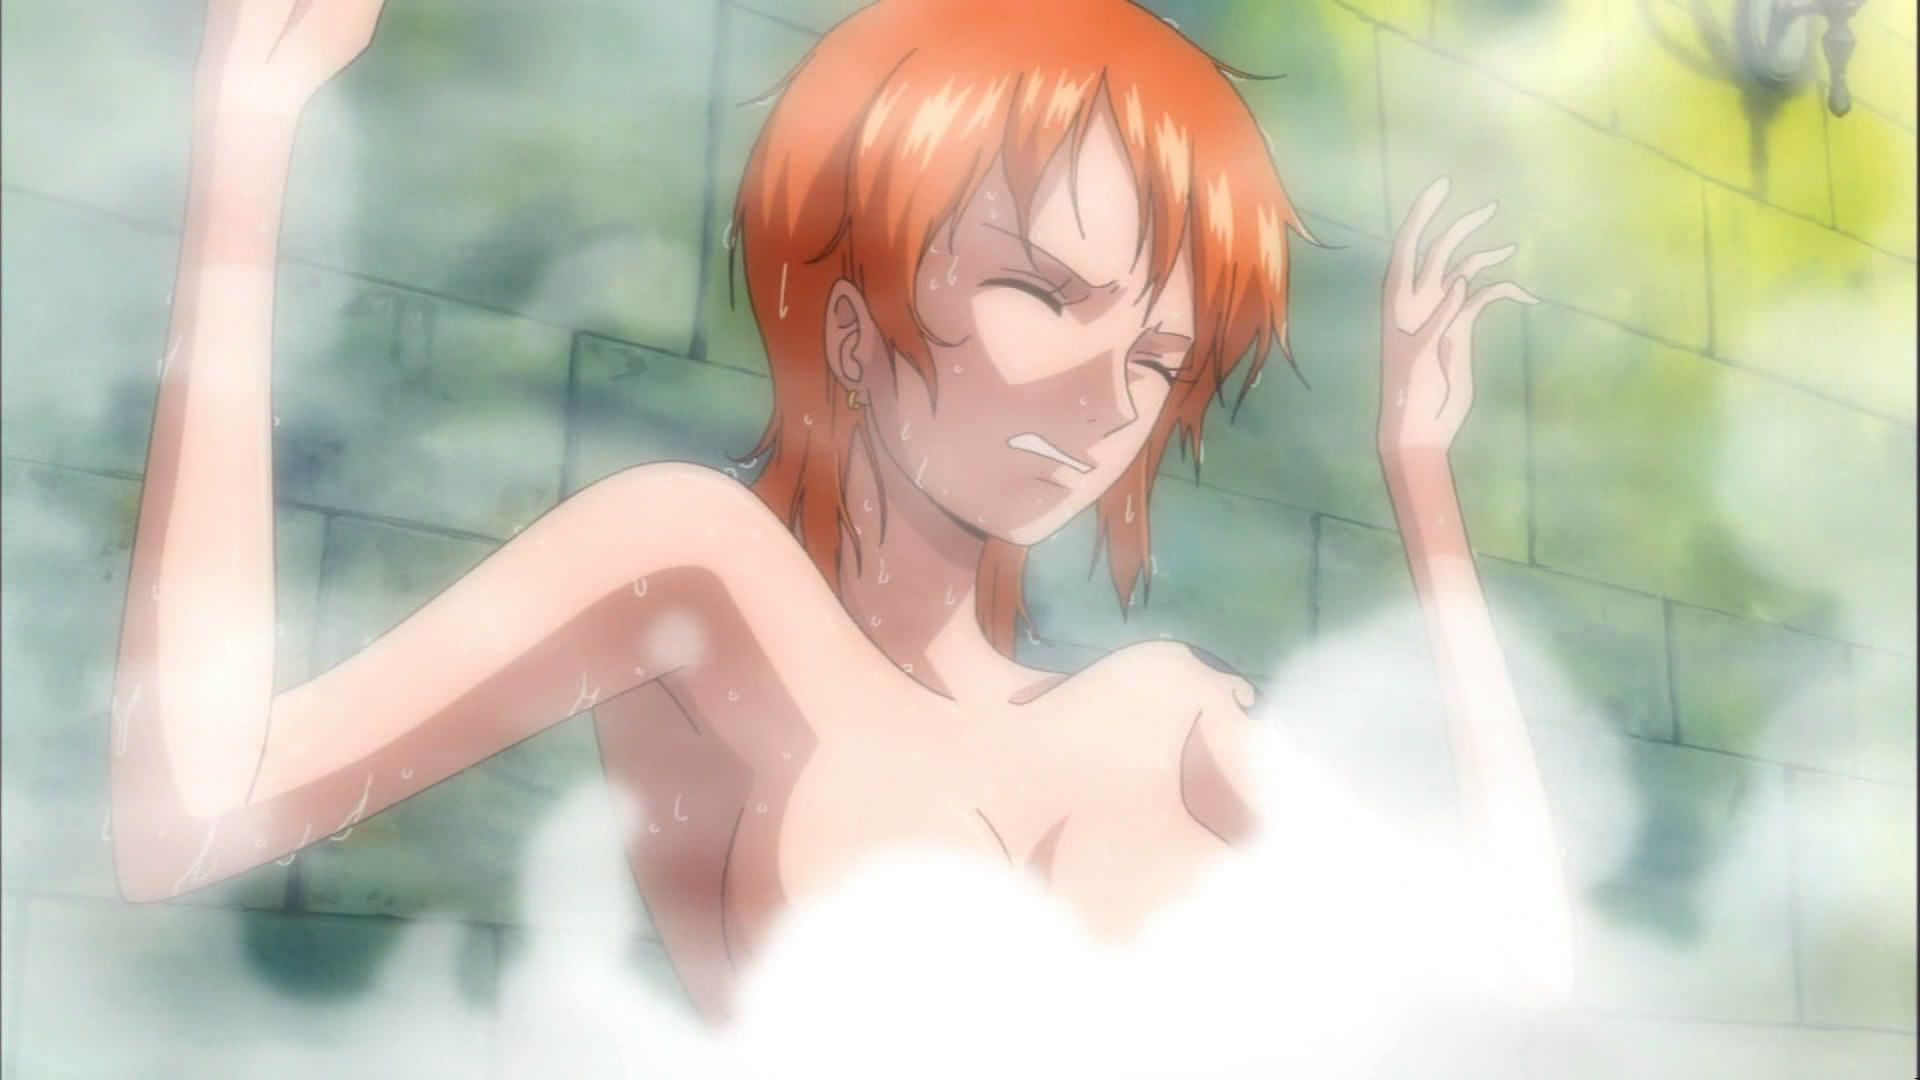 【 image 】 One piece The fact that the sperm of the boys of the world was squeezed by this Nami's bathing scene wwwwwww 3